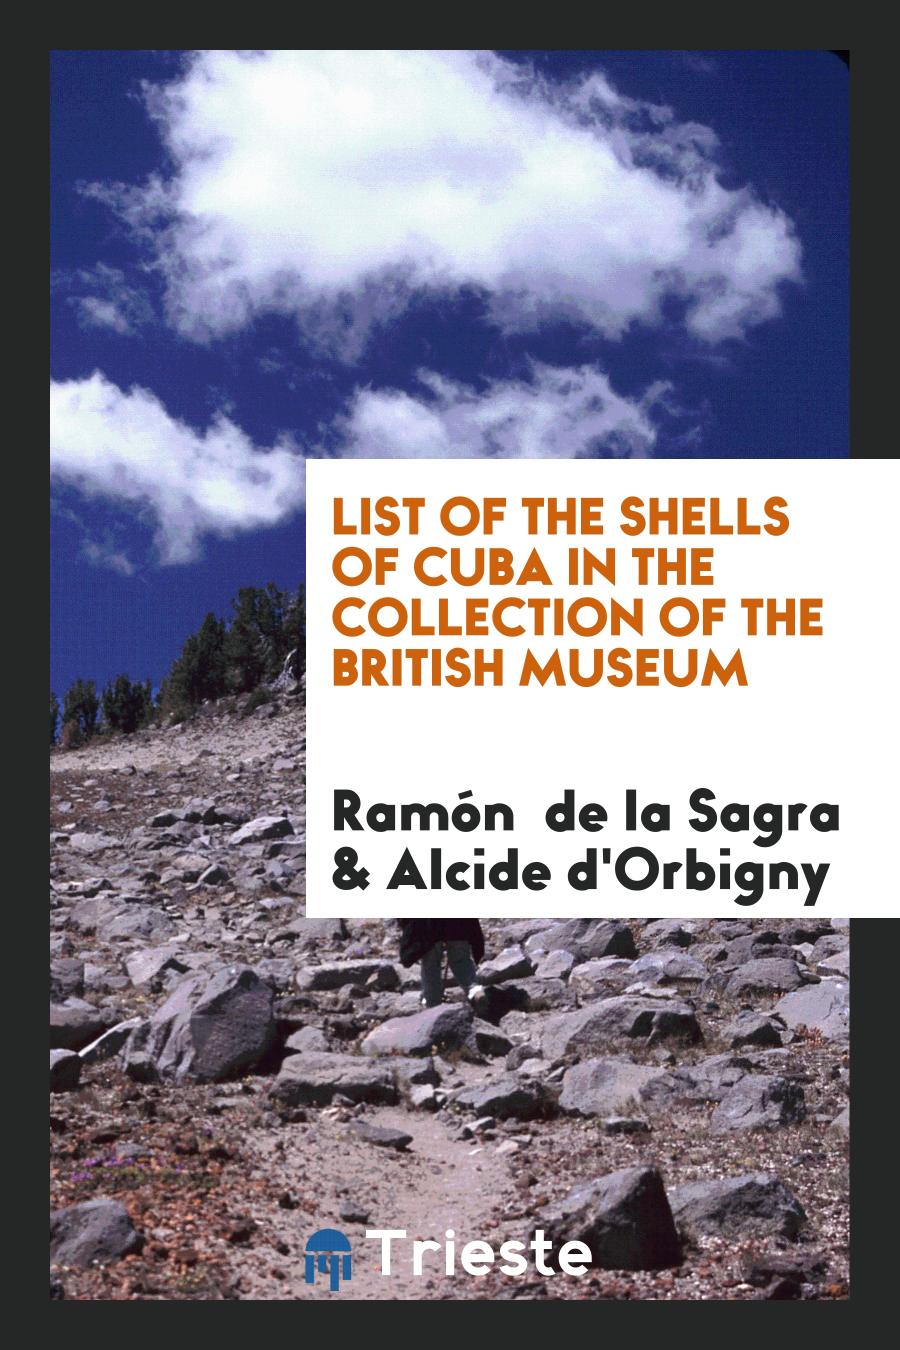 List of the Shells of Cuba in the Collection of the British Museum